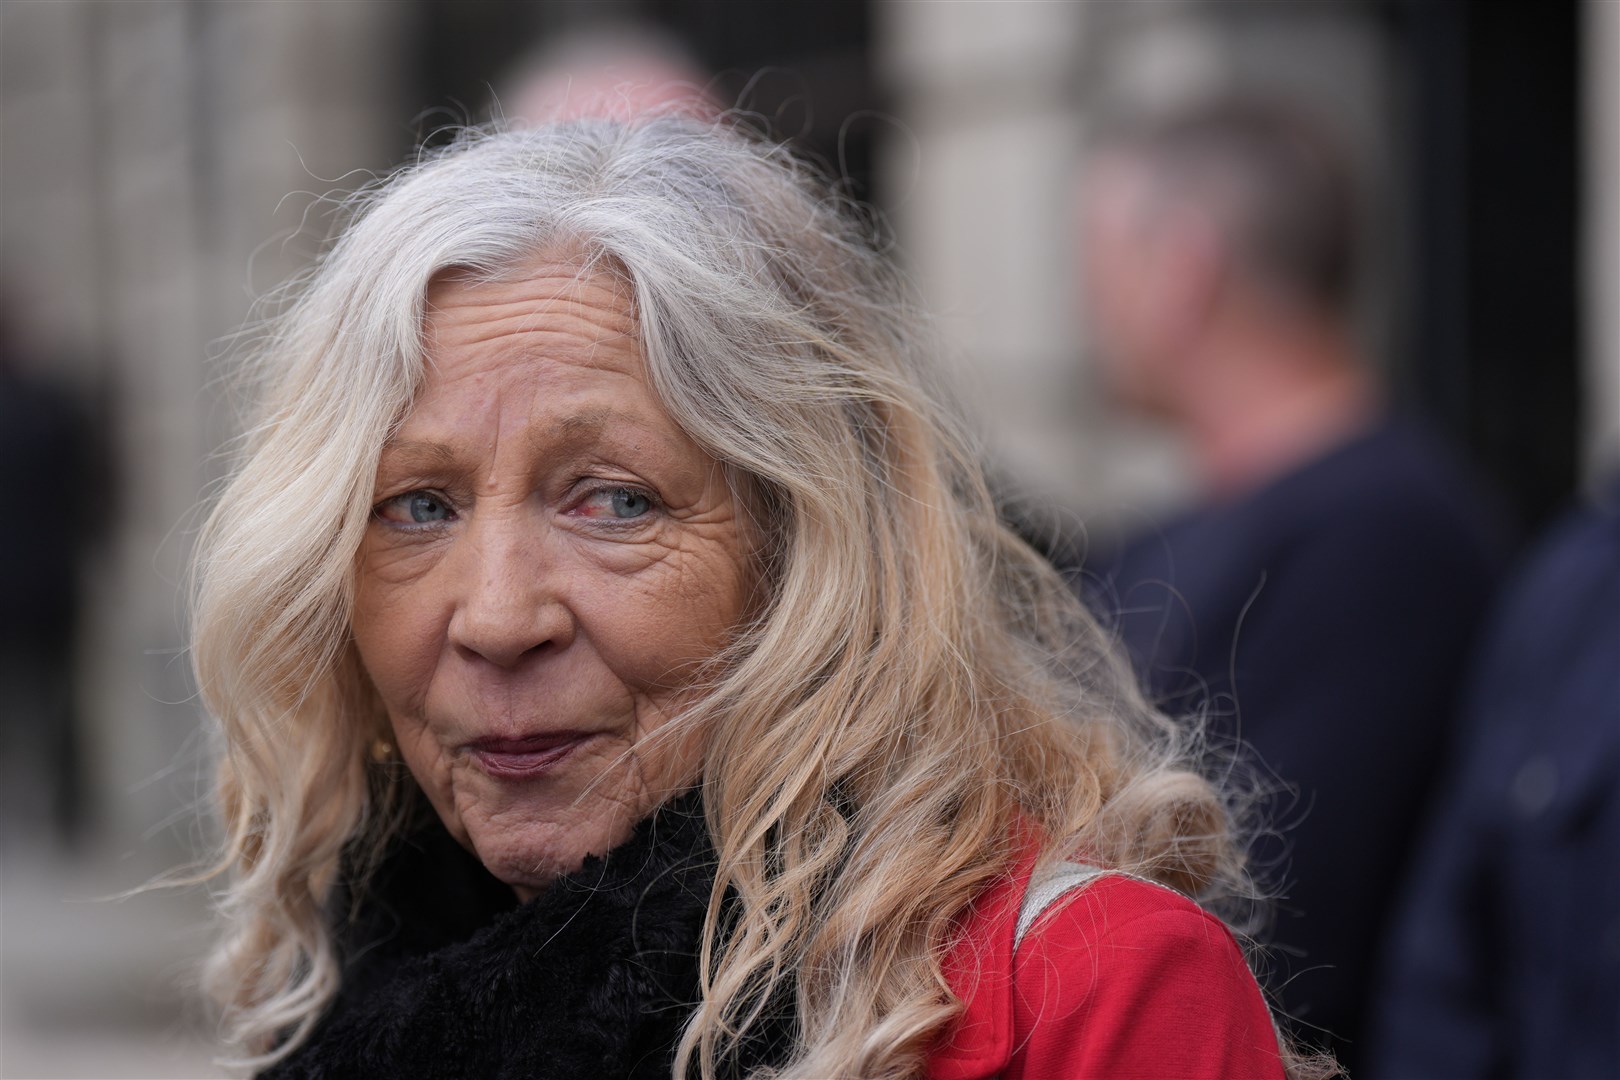 Stardust survivor Antoinette Keegan, who lost her two sisters Mary and Martina in the fire, arrives at Leinster House, Dublin (Niall Carson/PA)